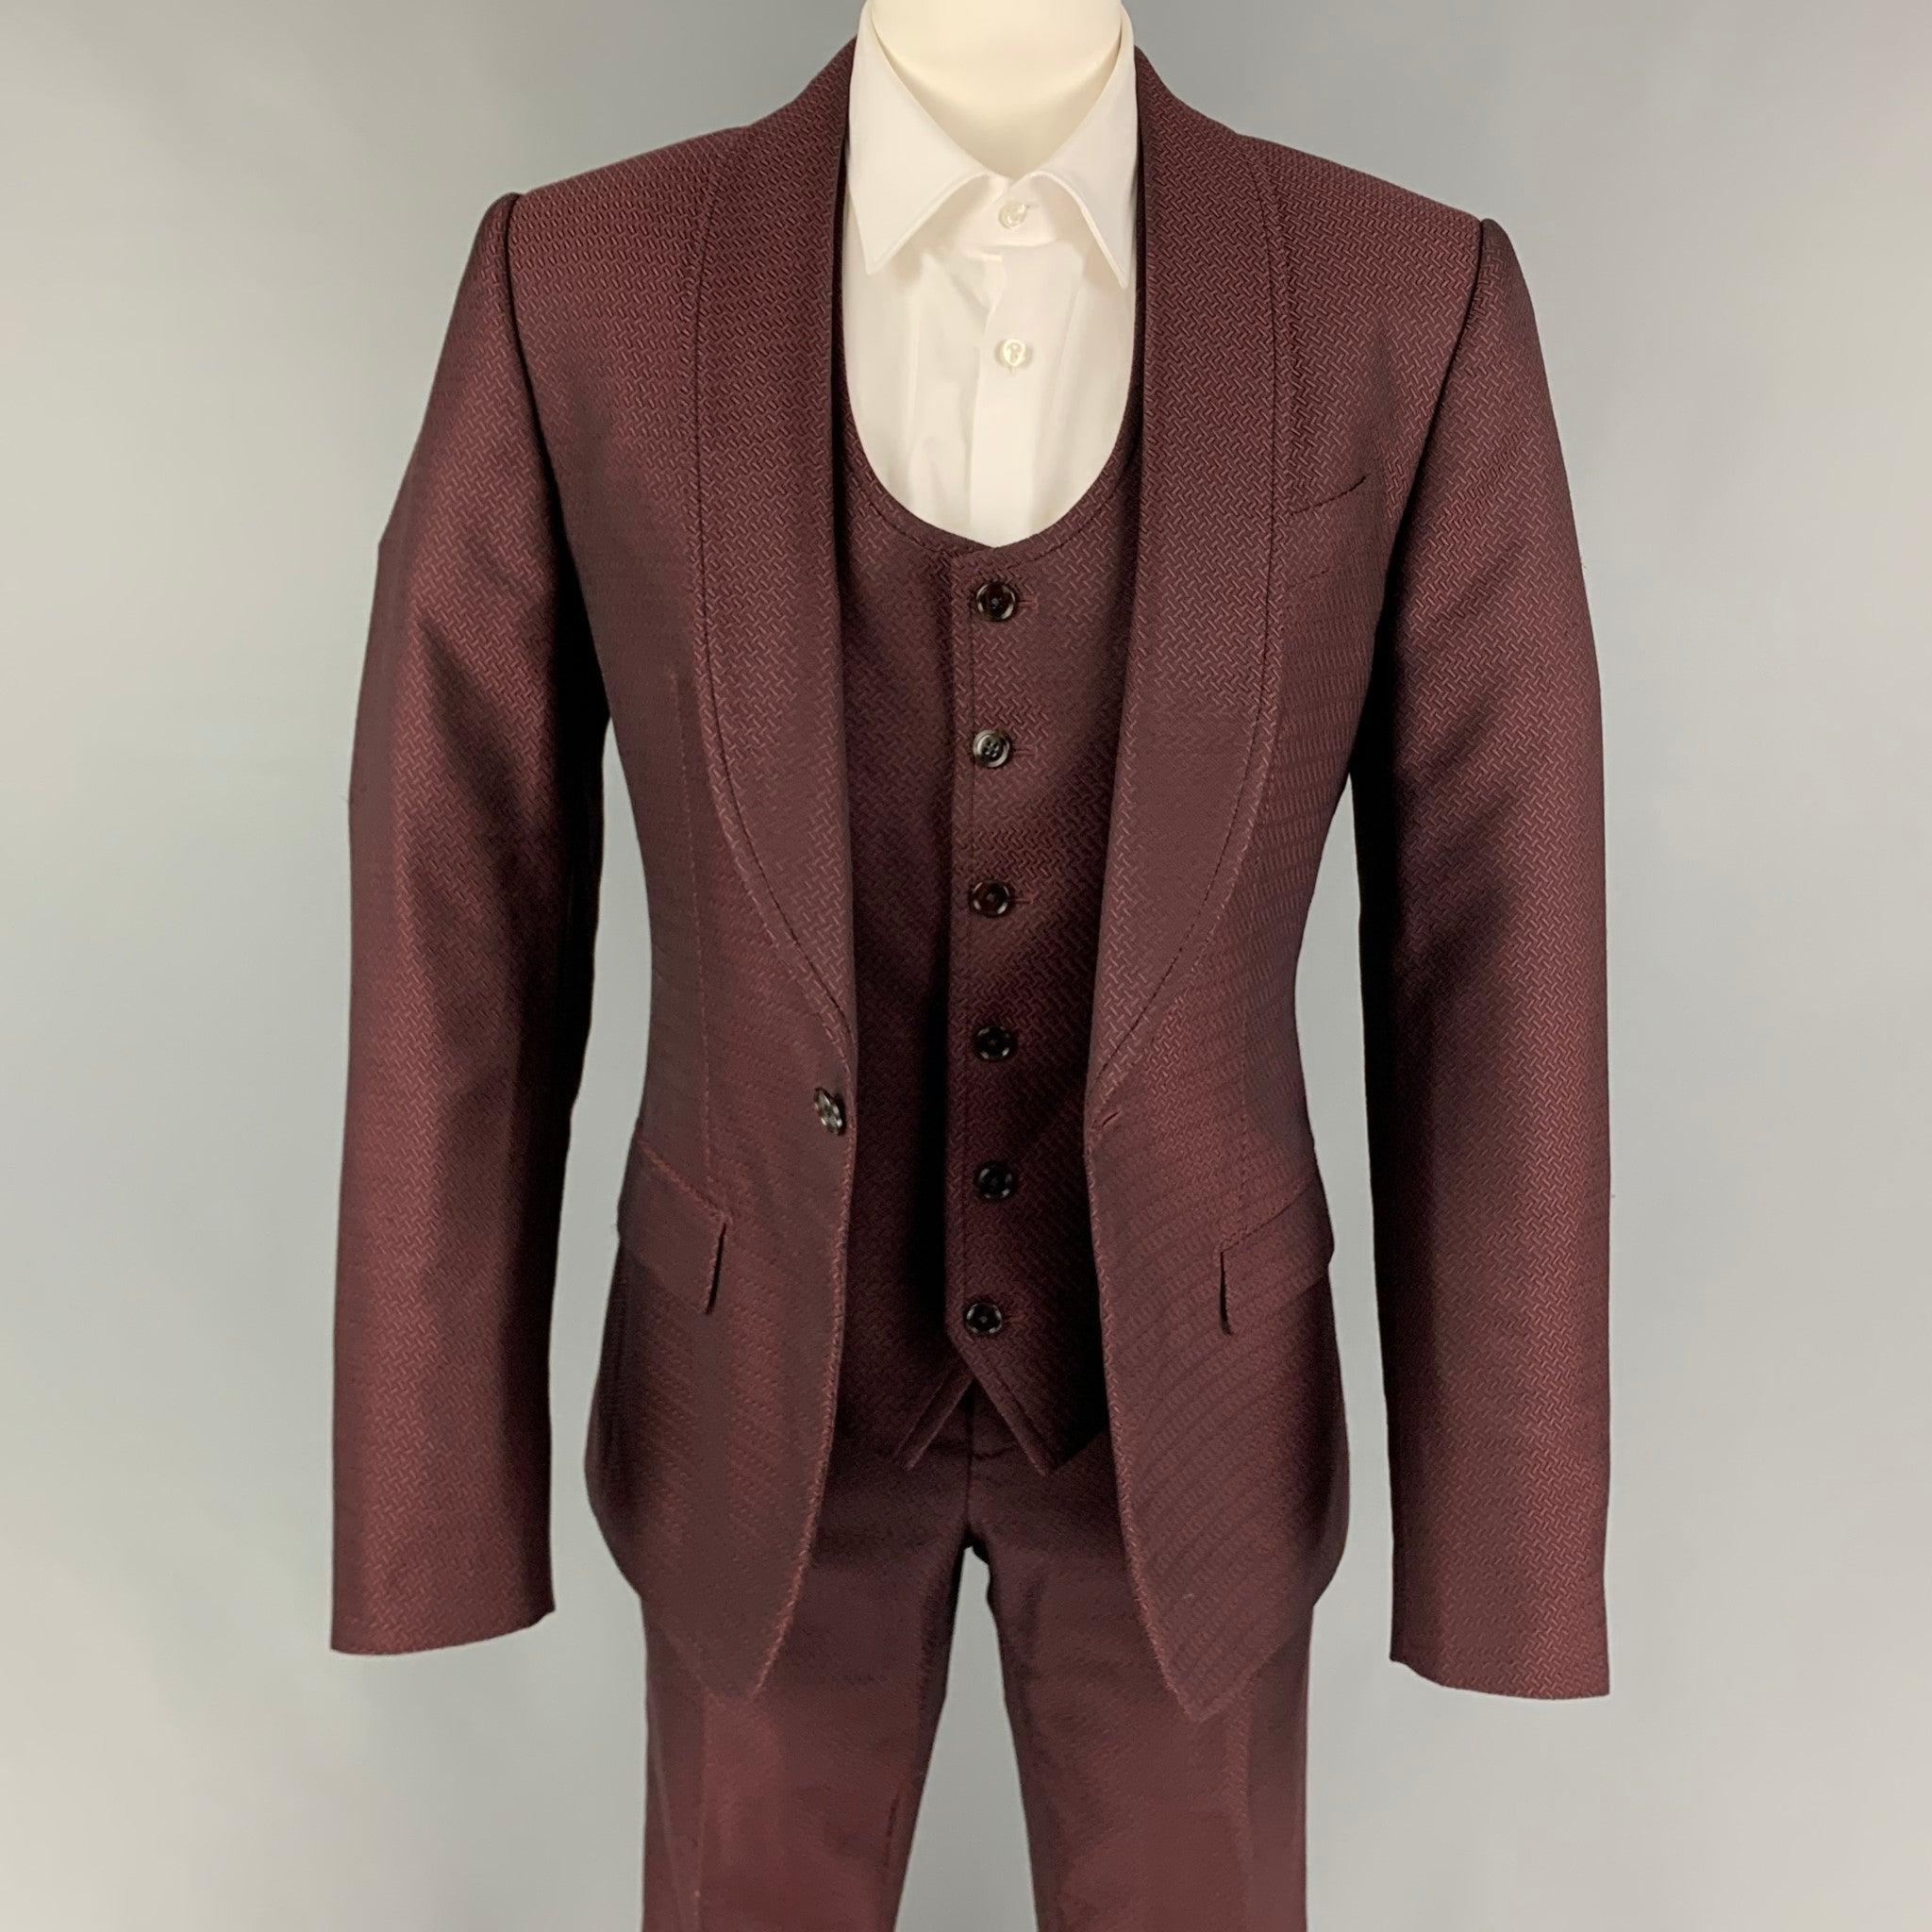 DOLCE & GABBANA 3 Piece
suit comes in a burgundy jacquard wool / silk wth a full liner and includes a single breasted, single button sport coat with shawl collar and a matching vest and flat front trousers. Made in Italy. Excellent Pre-Owned